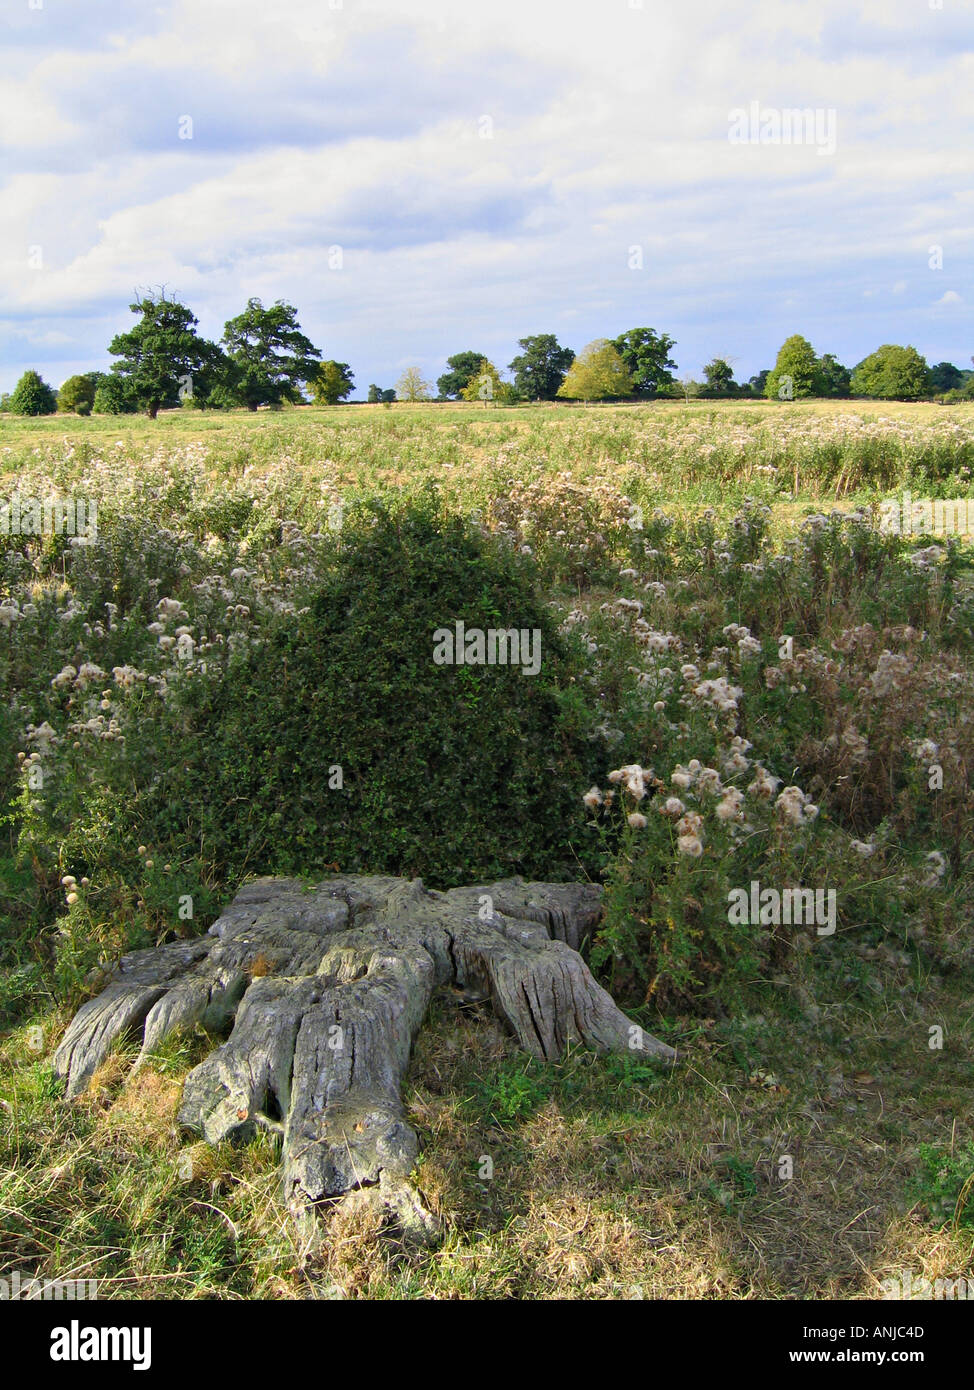 Tree stump, meadows and trees in the fields around Belvoir Castle and Woolsthorpe, Leicestershire Stock Photo